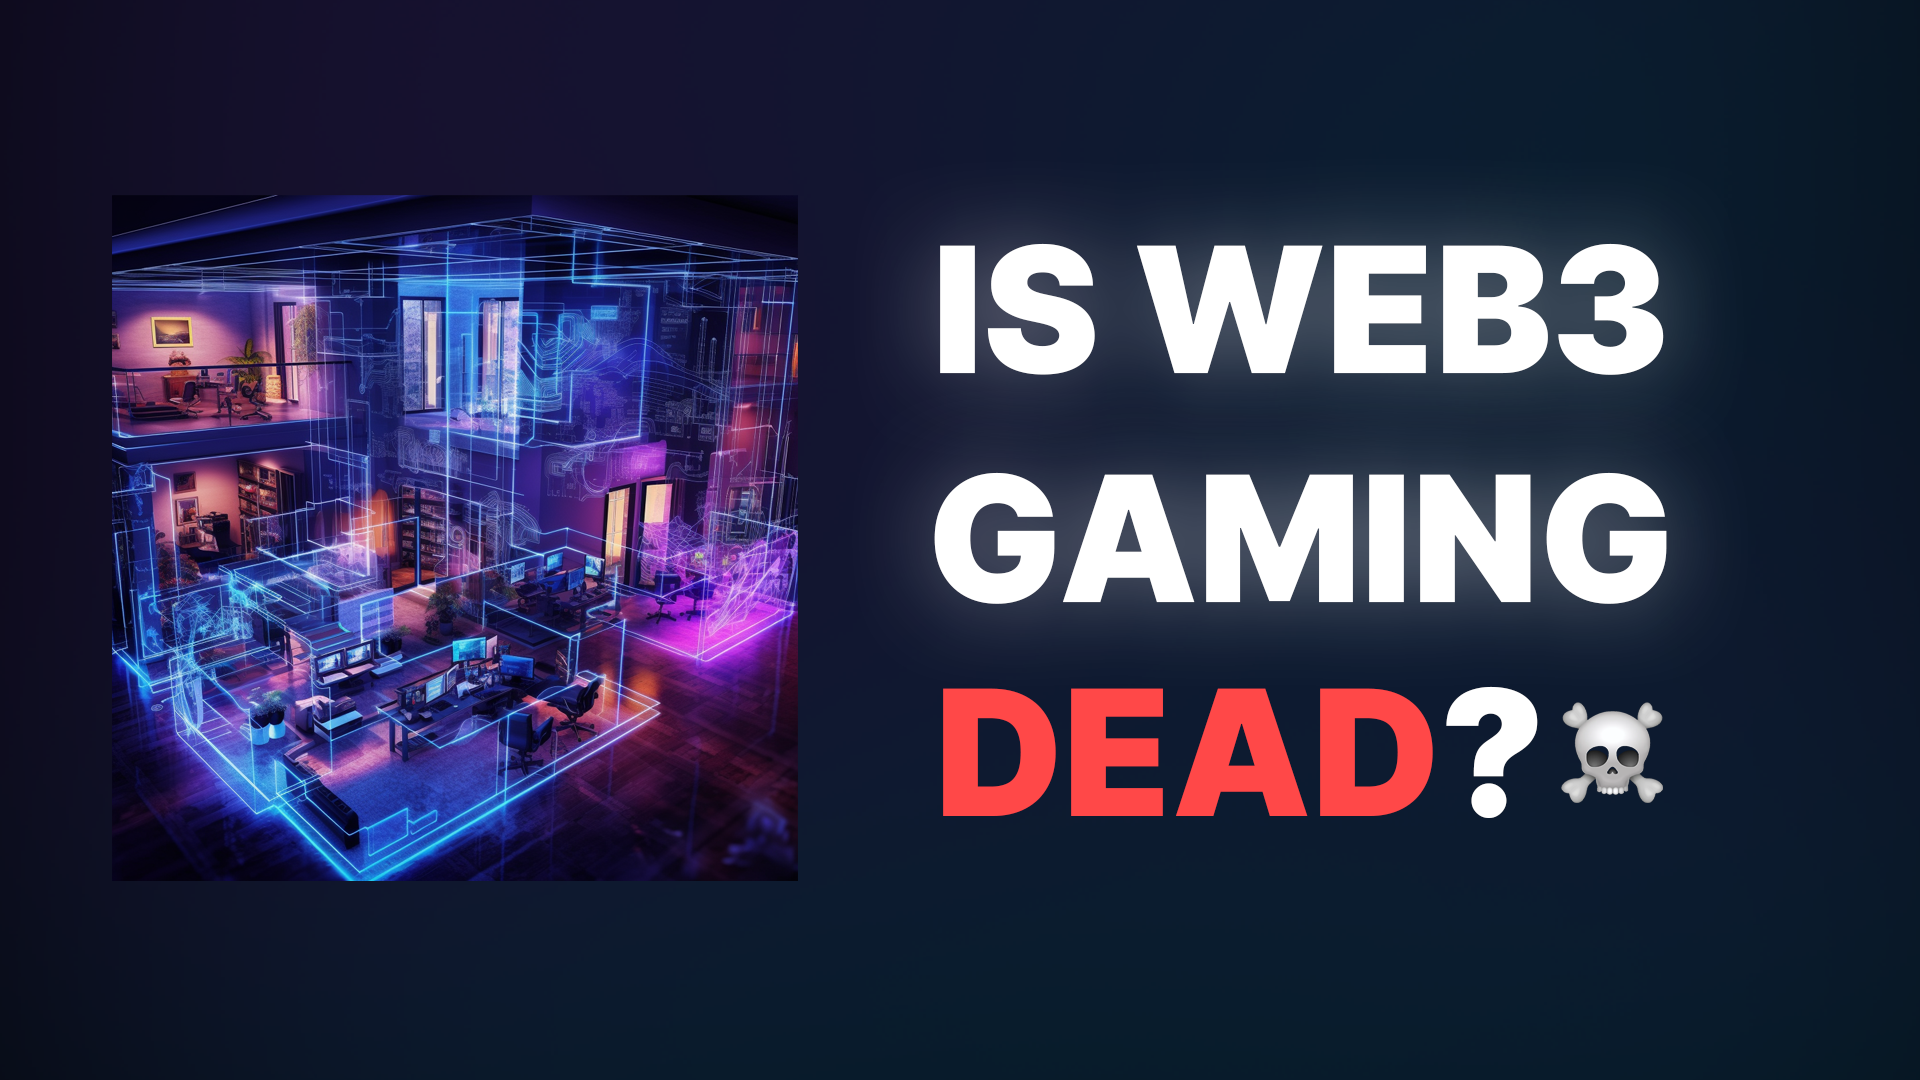 You're (Probably) Wrong About Web3 Gaming